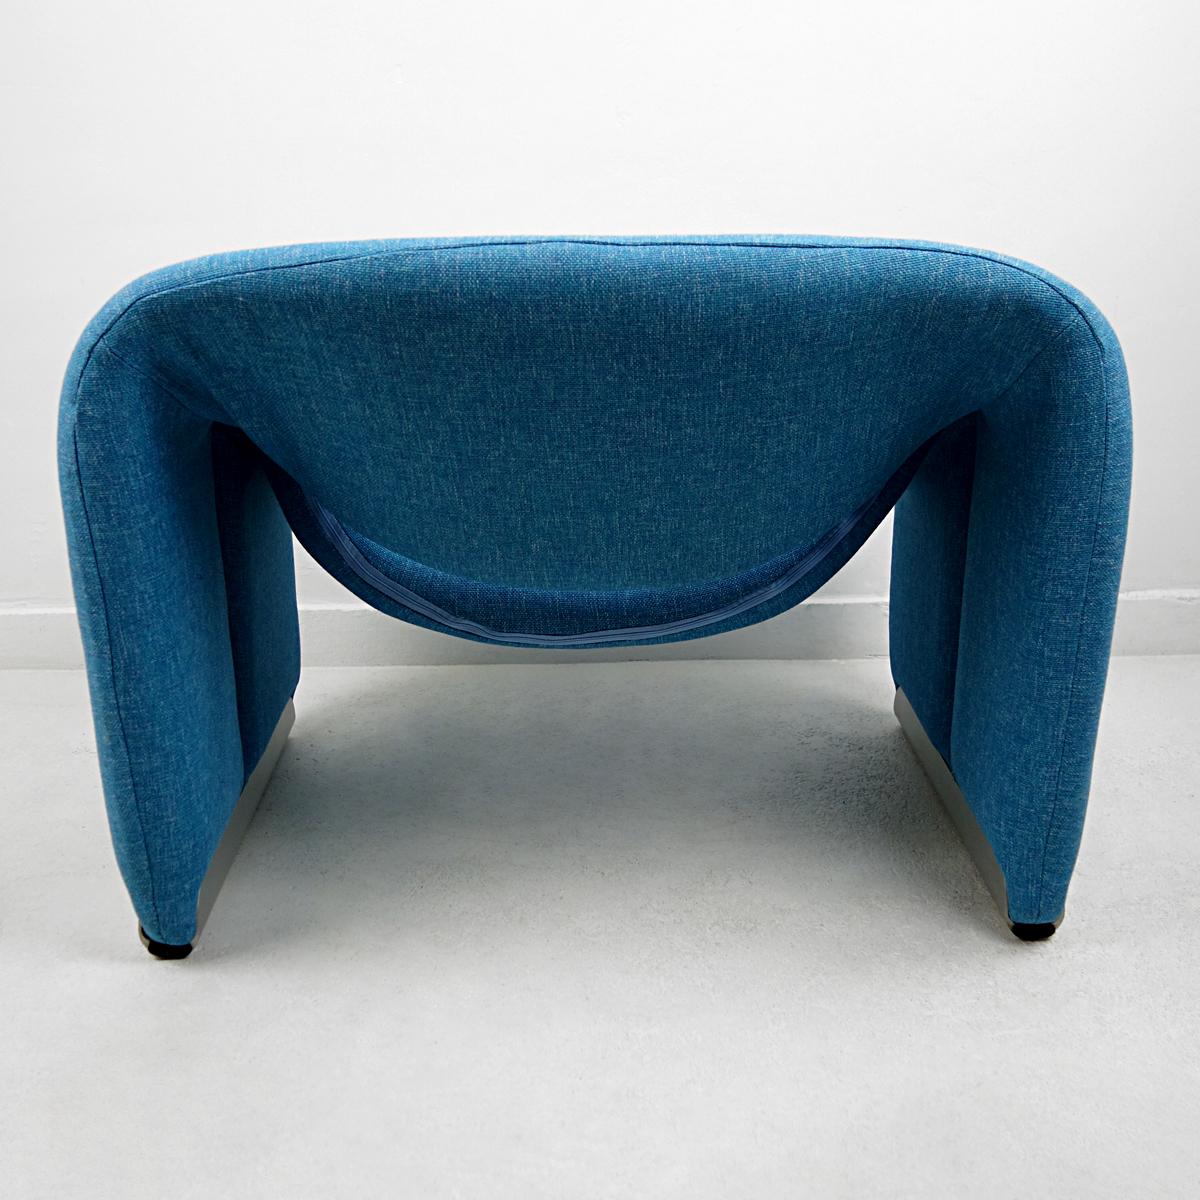 Pair of Groovy Chairs Blue Fabric and Grey Feet by Pierre Paulin for Artifort 1